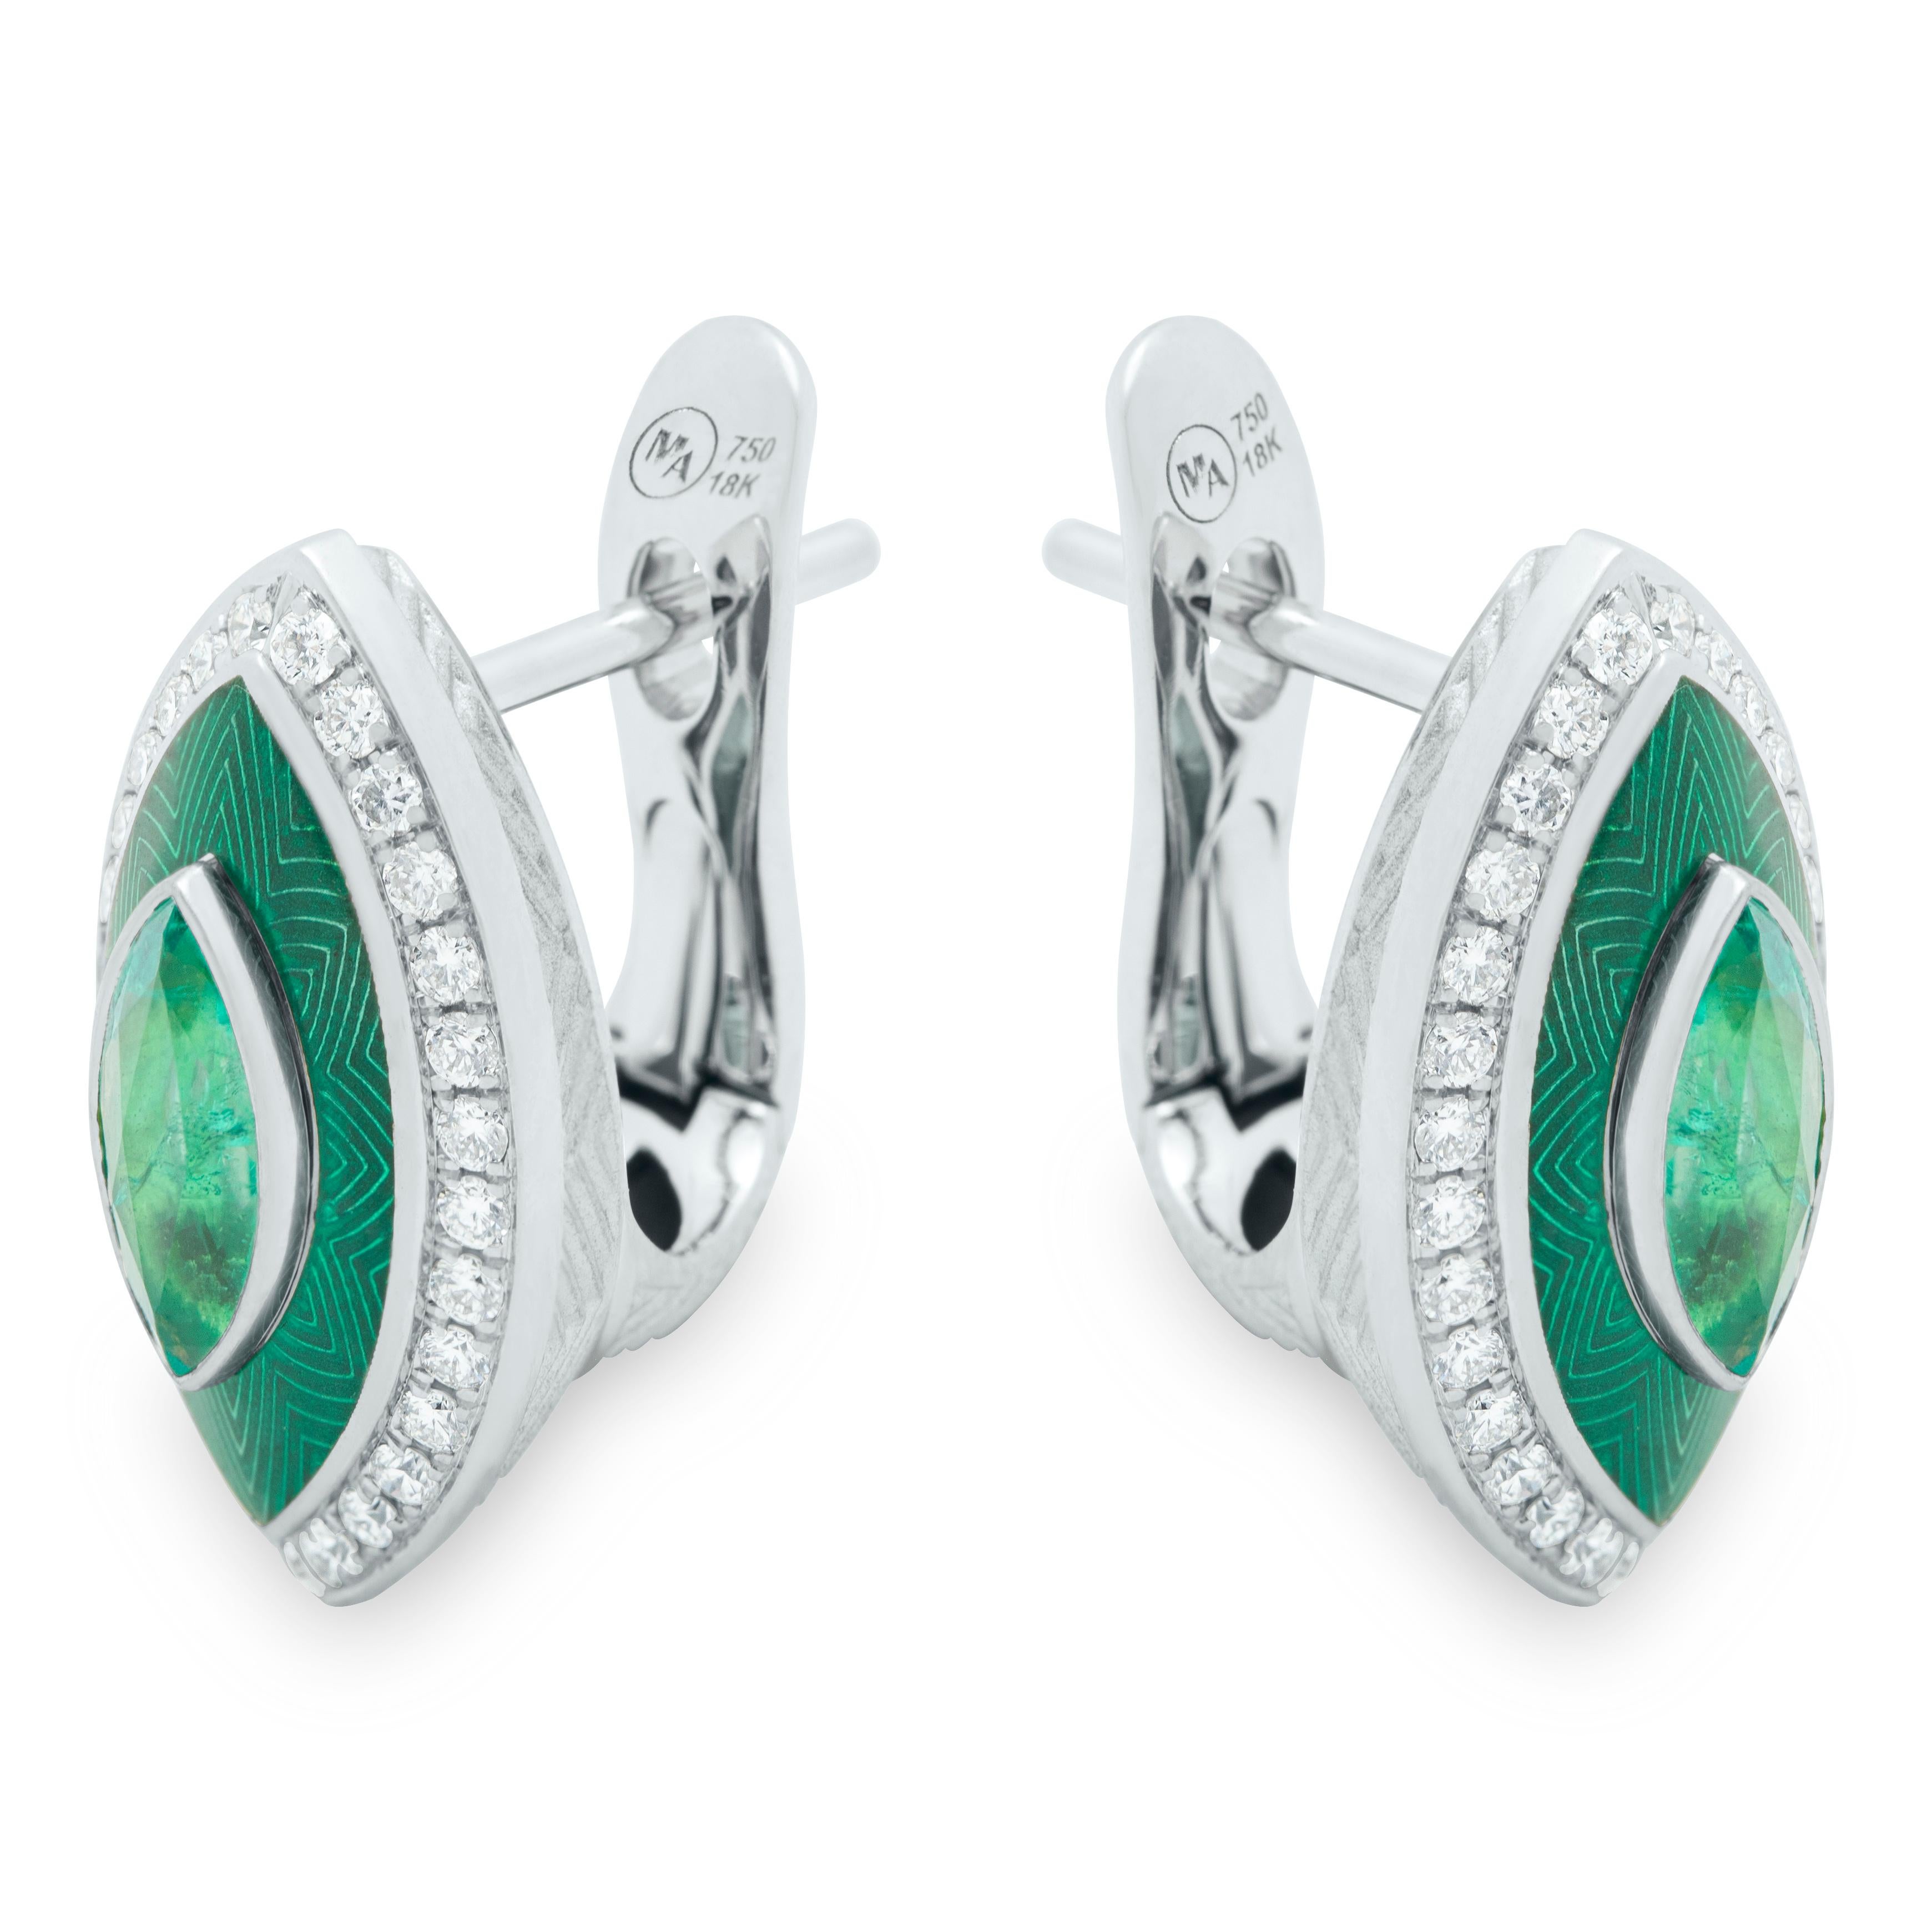 Emeralds Diamonds 18 Karat White Gold Tweed Marquise Earrings
What we presented to you are Earrings from our famous Tweed collection. But it was made in an unusual form of a marquise. Incredibly beautiful green shades of two central stones Emeralds